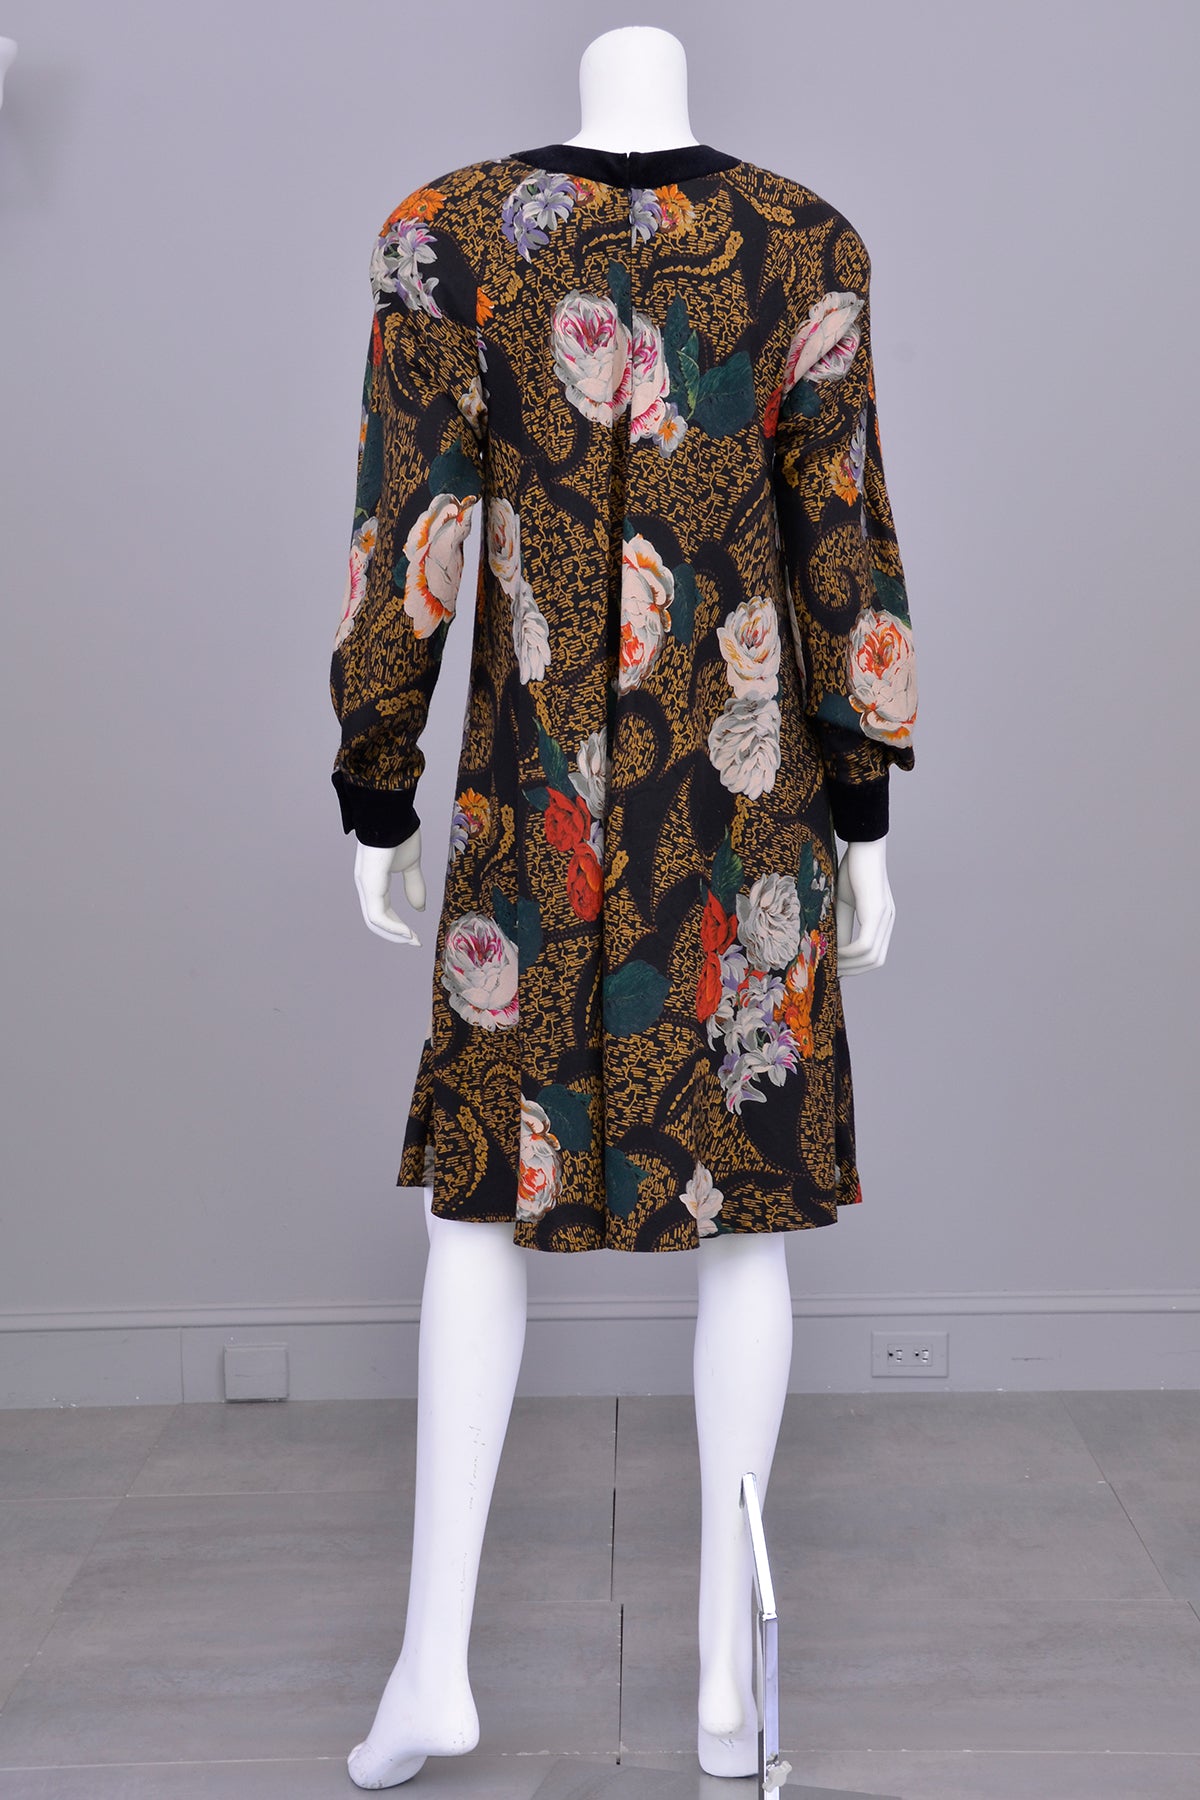 1980s Painterly Rose Print Trapeze Dress by Donna Morgan for Leslie Fay